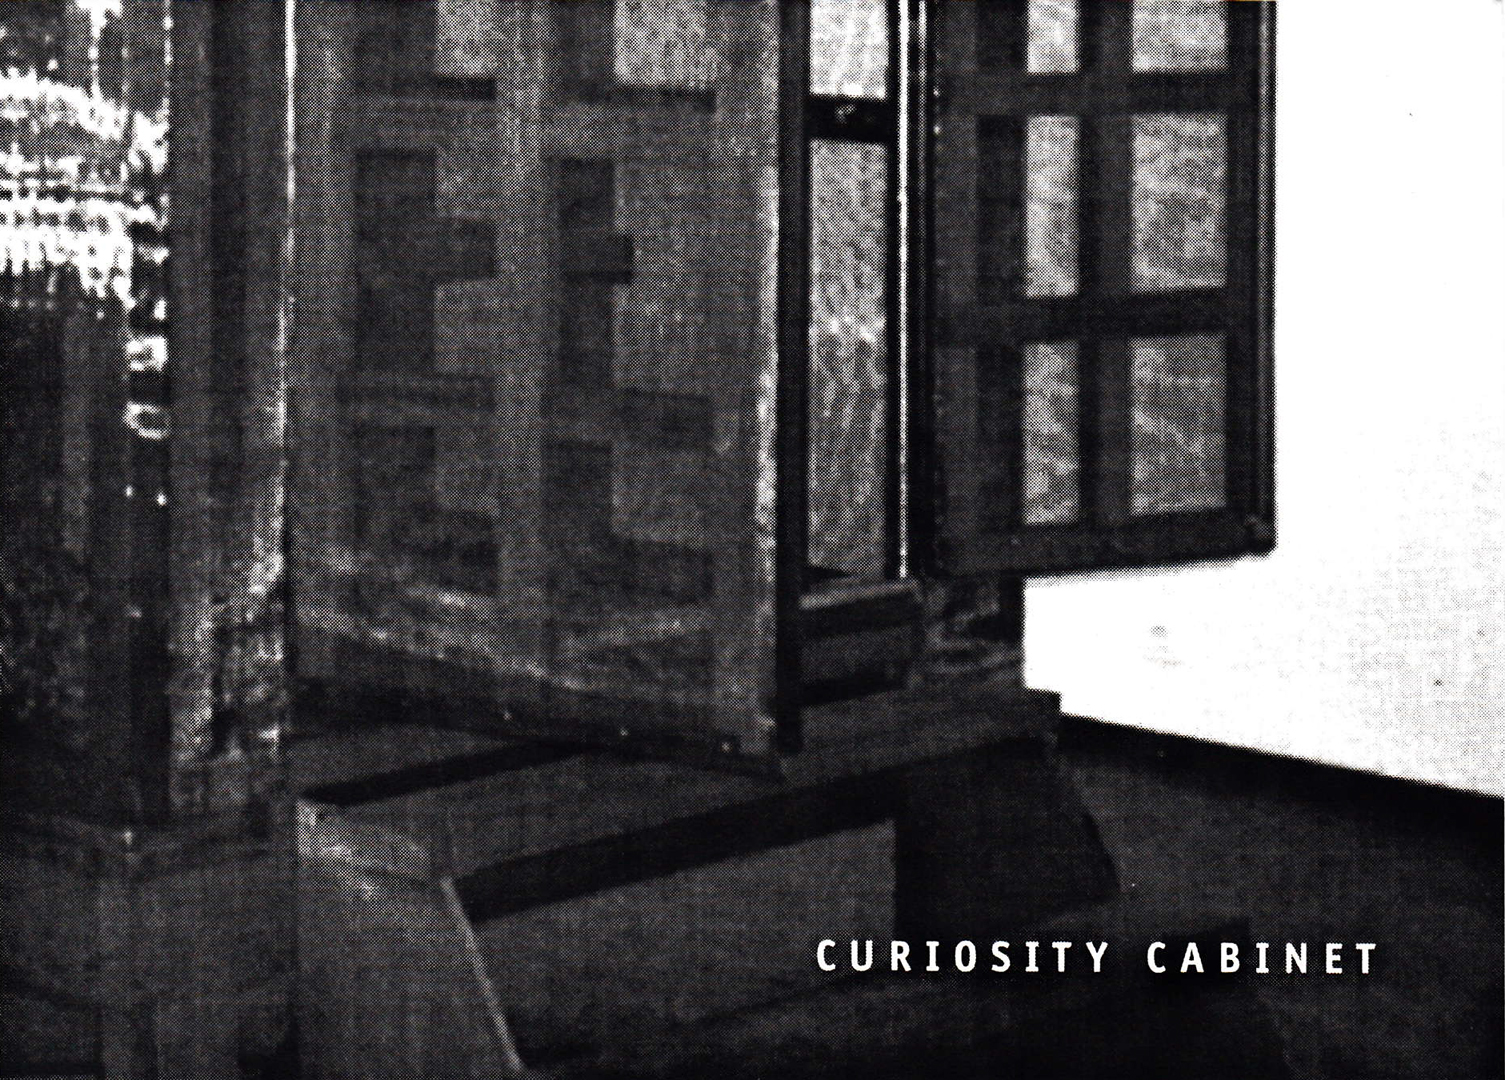 ©, Catherine Richards, Curiosity Cabinet at the End of the Millenium